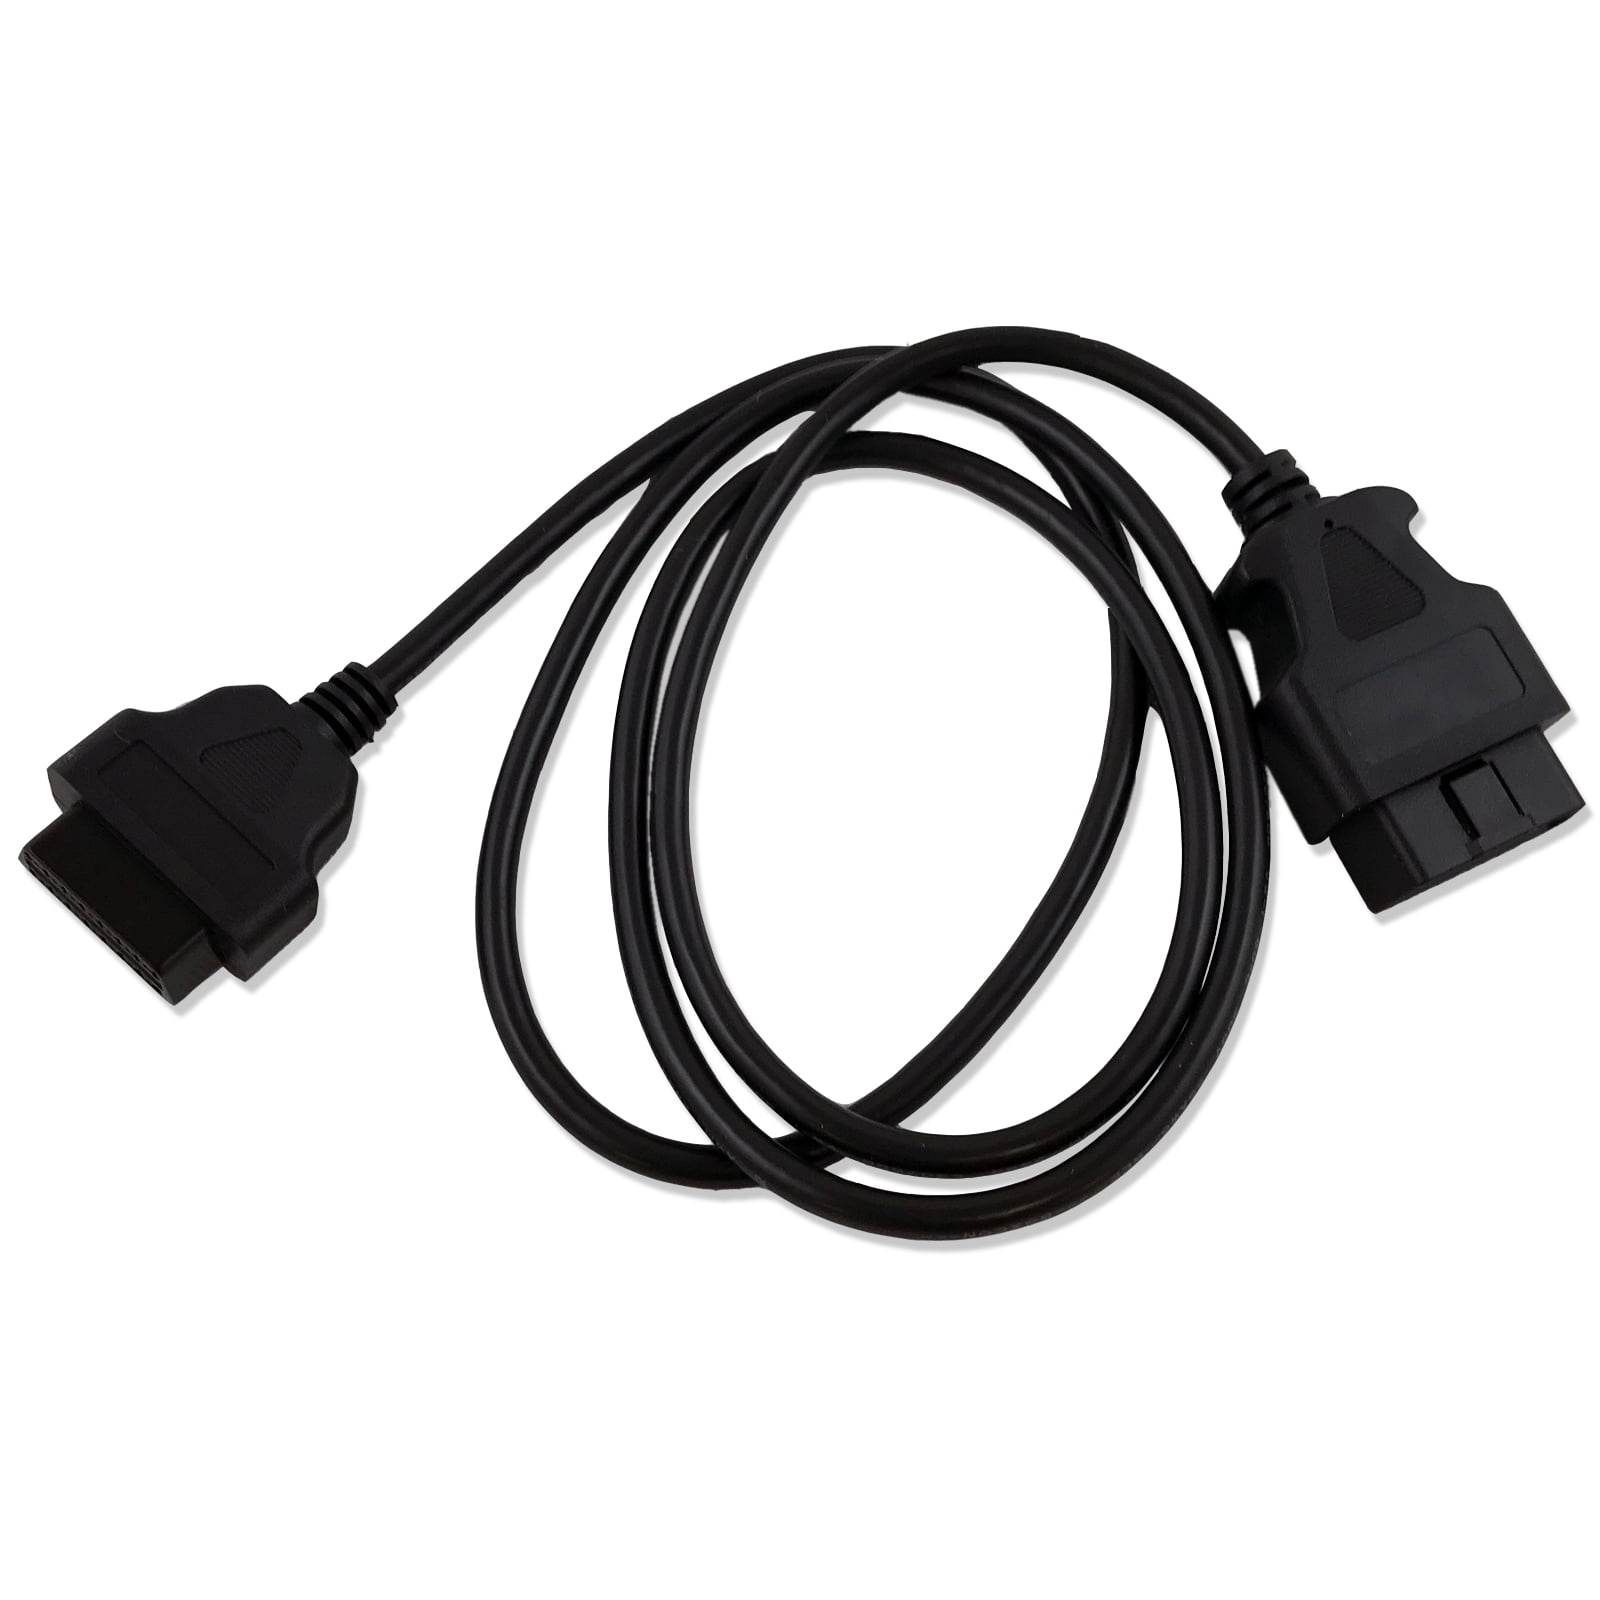 10M 10 meters OBDII OBD2 16 Pin Extension Extent Cable Male to Female 